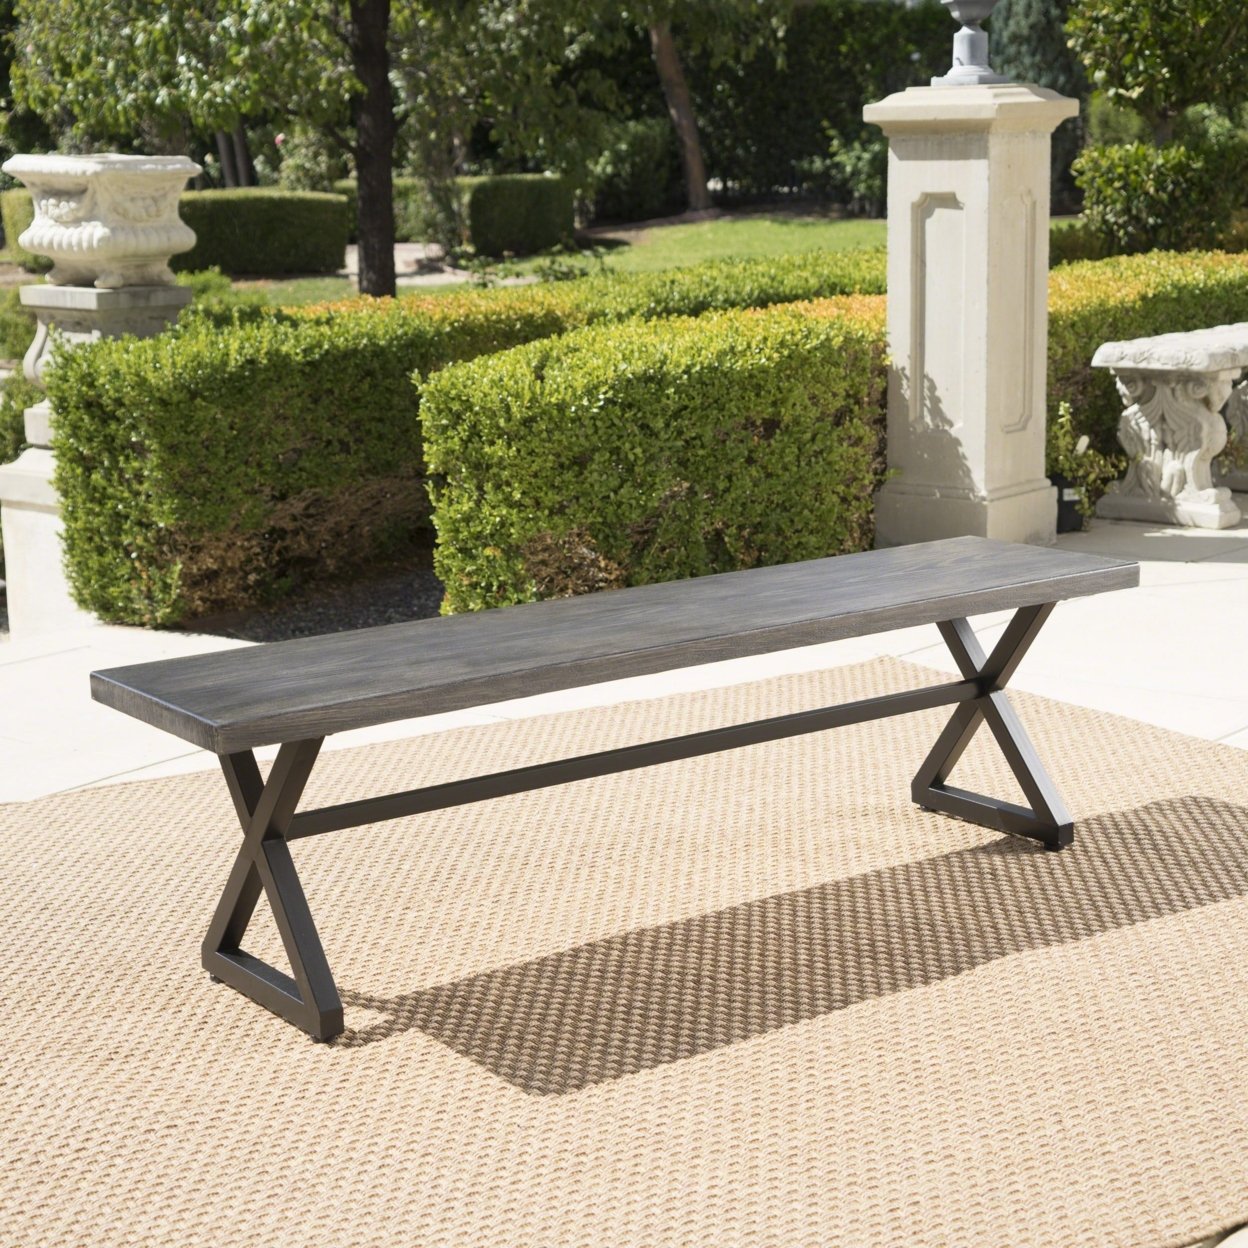 Rosarito Outdoor Aluminum Dining Bench With Black Steel Frame - Gray